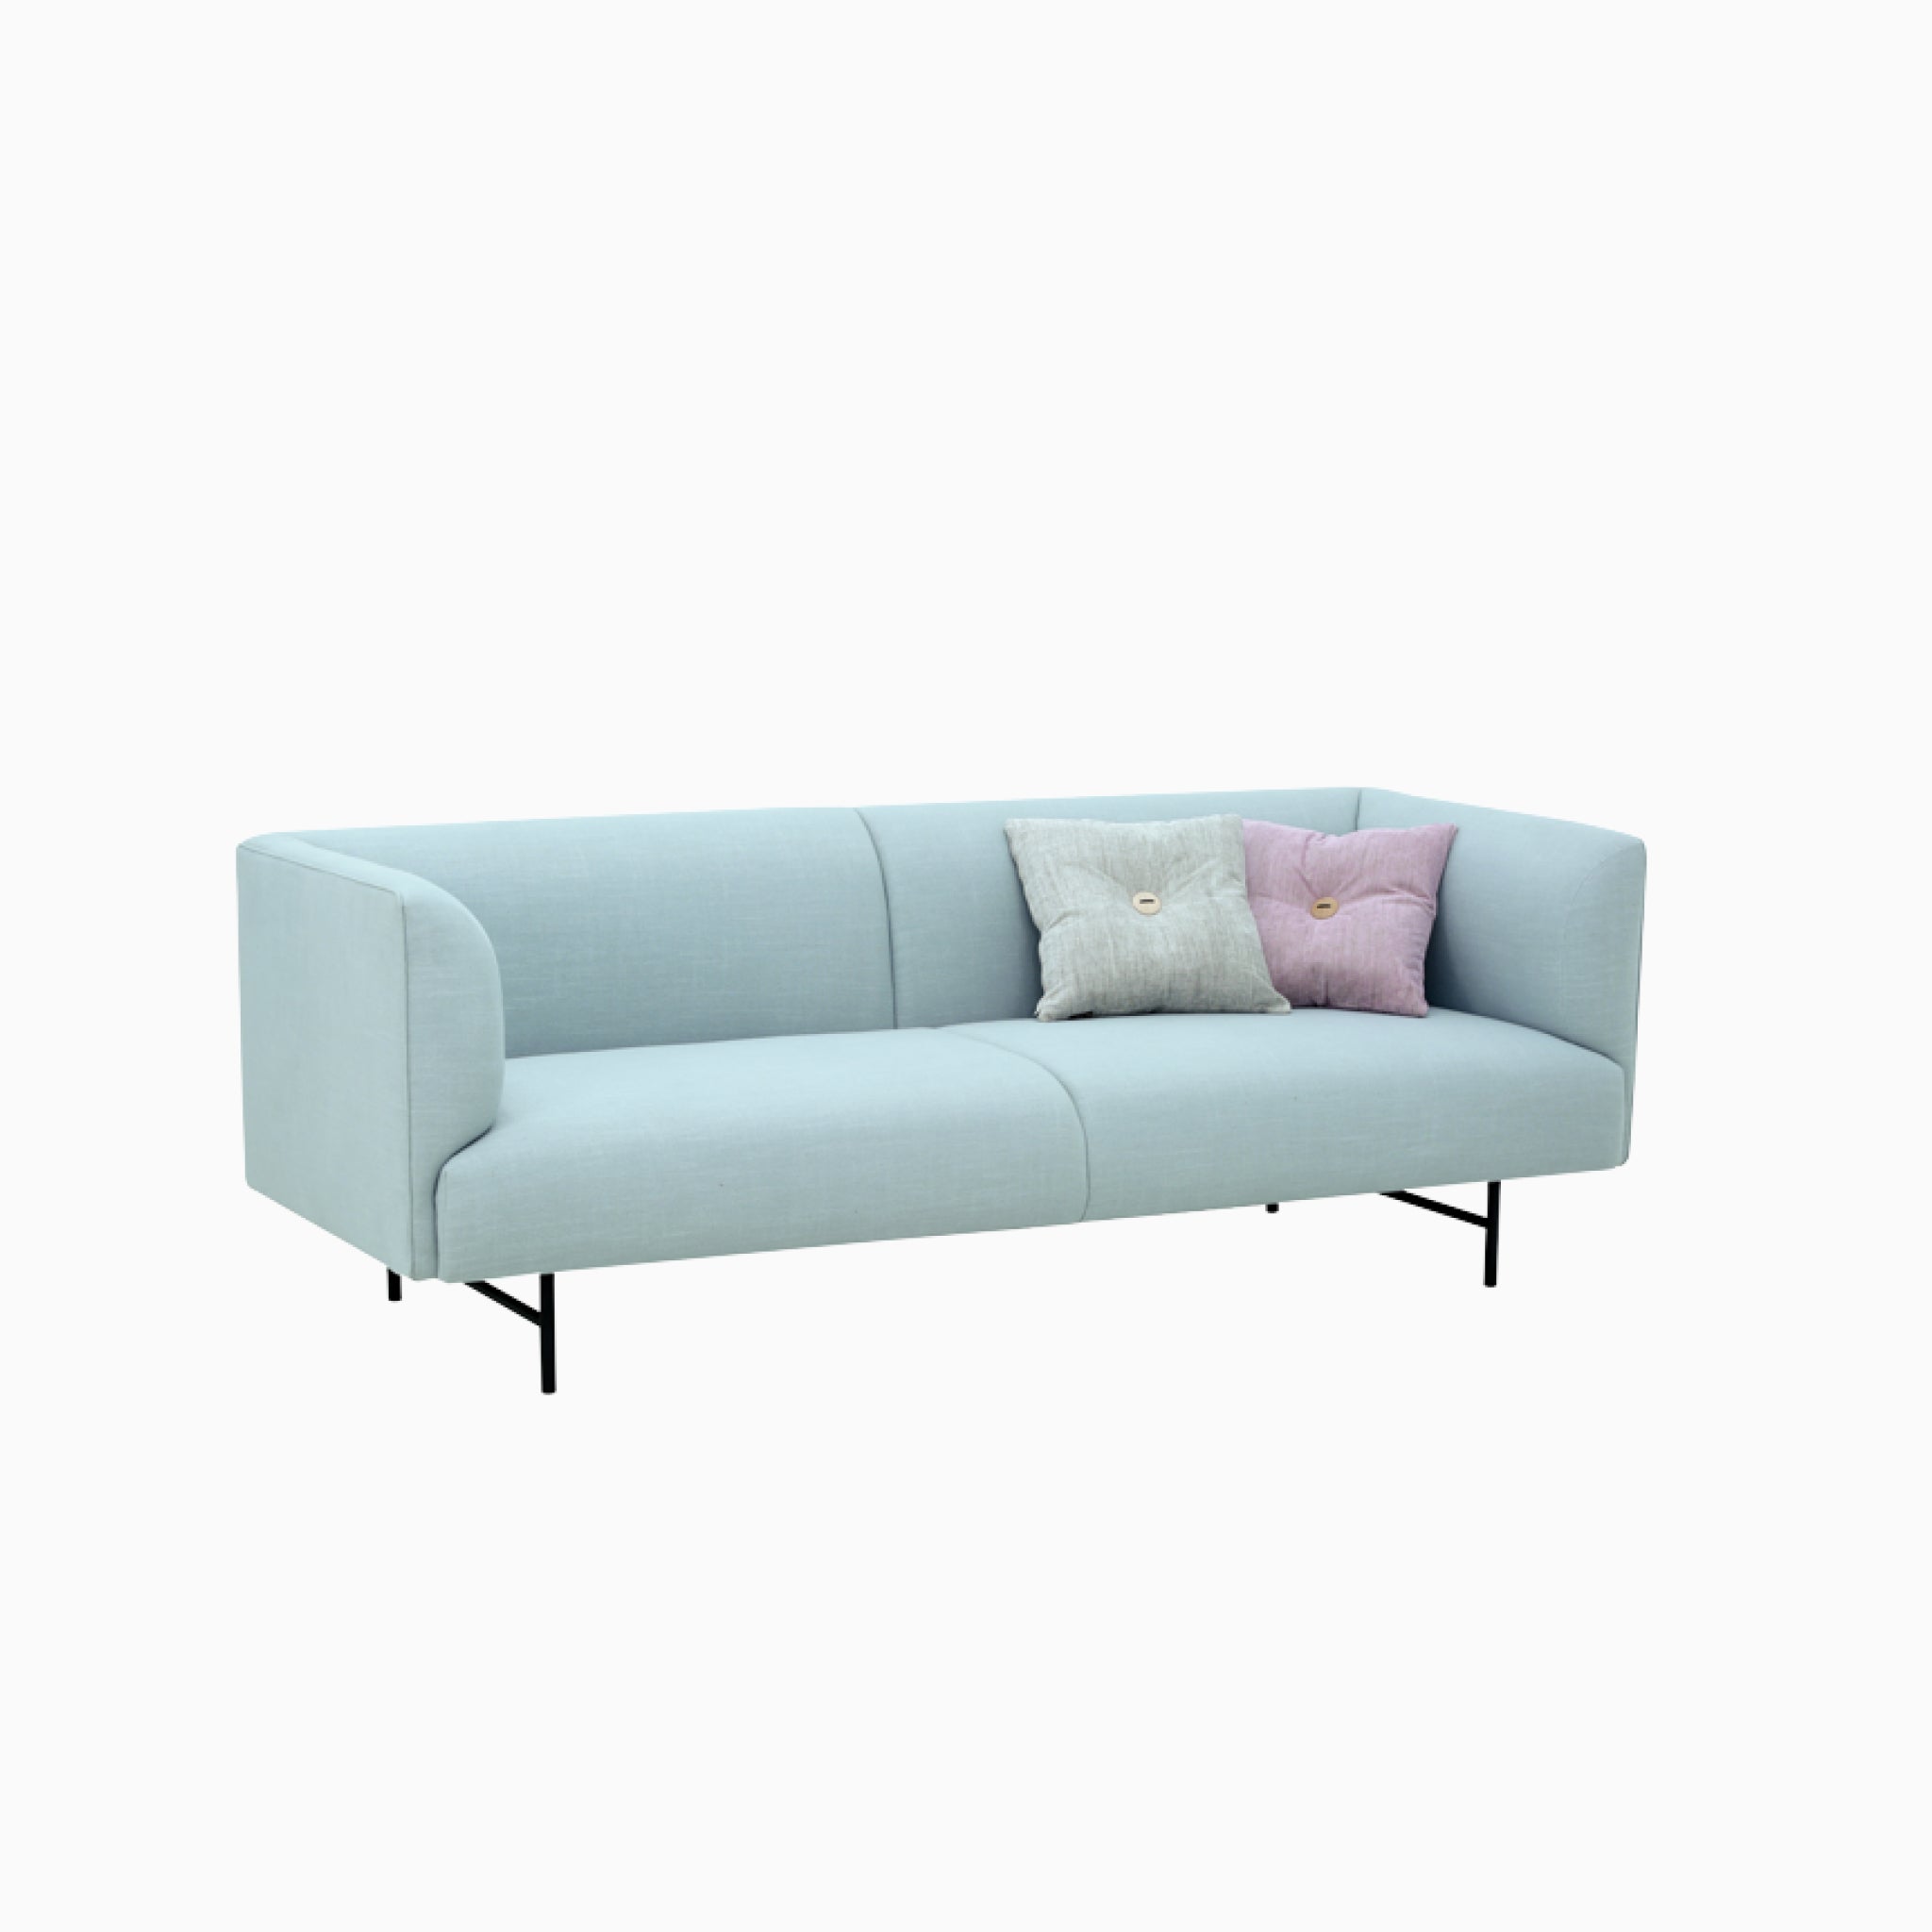 Nord 3 Seater Sofa with Crepon Fabric